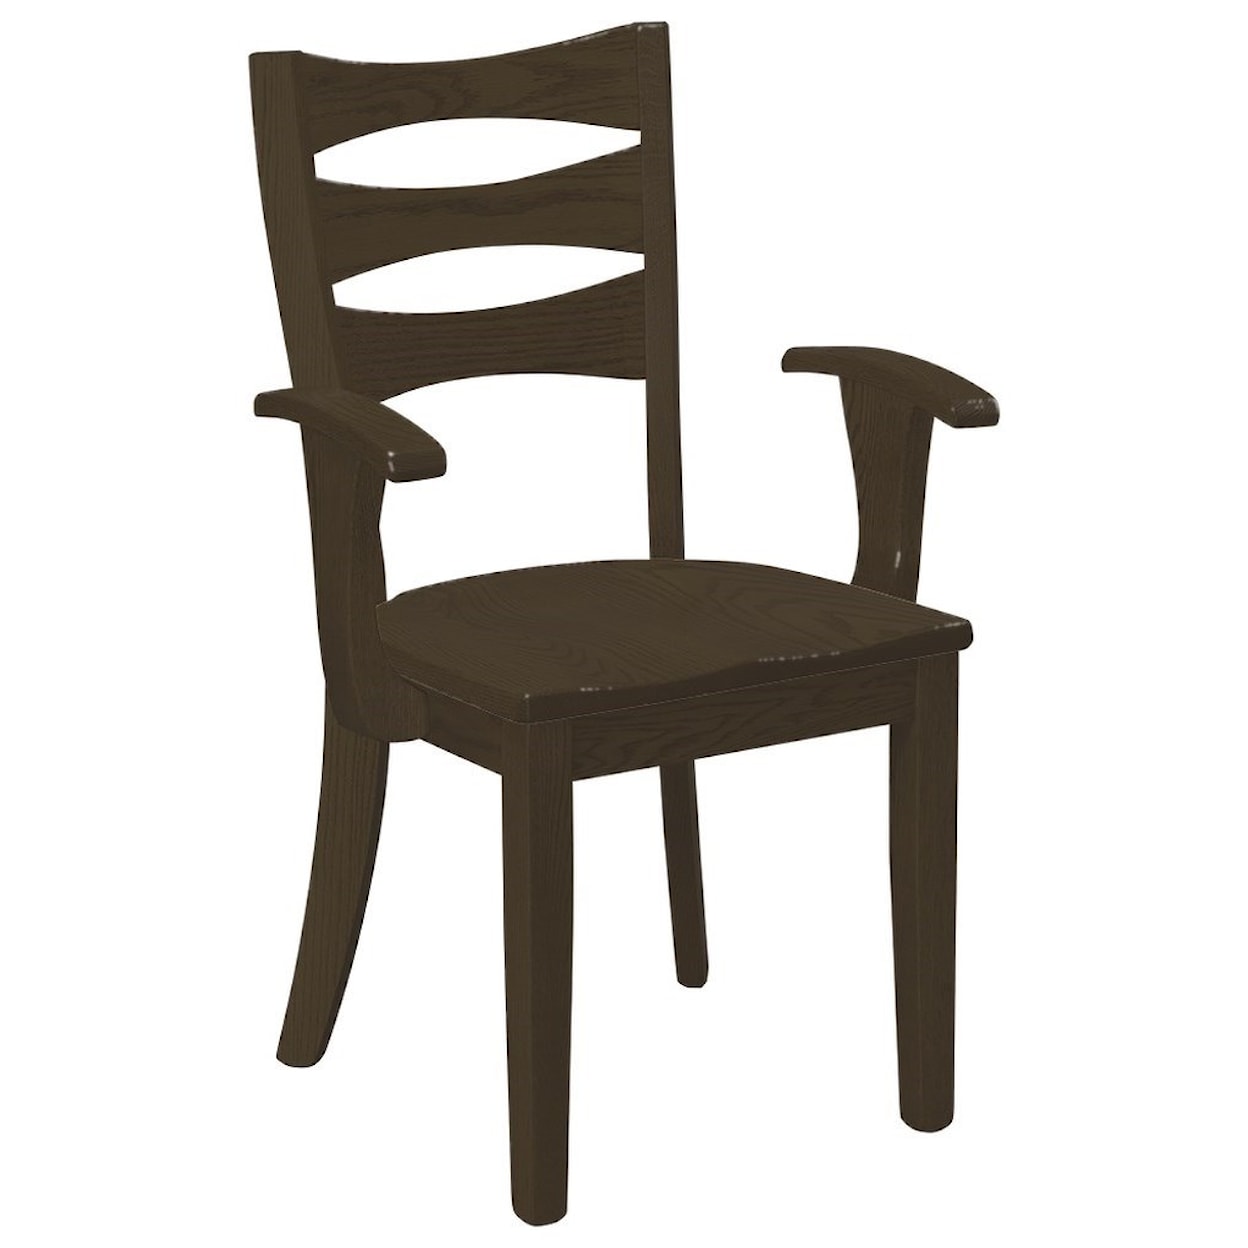 Daniels Amish Chairs and Barstools Sierra Arm Chair